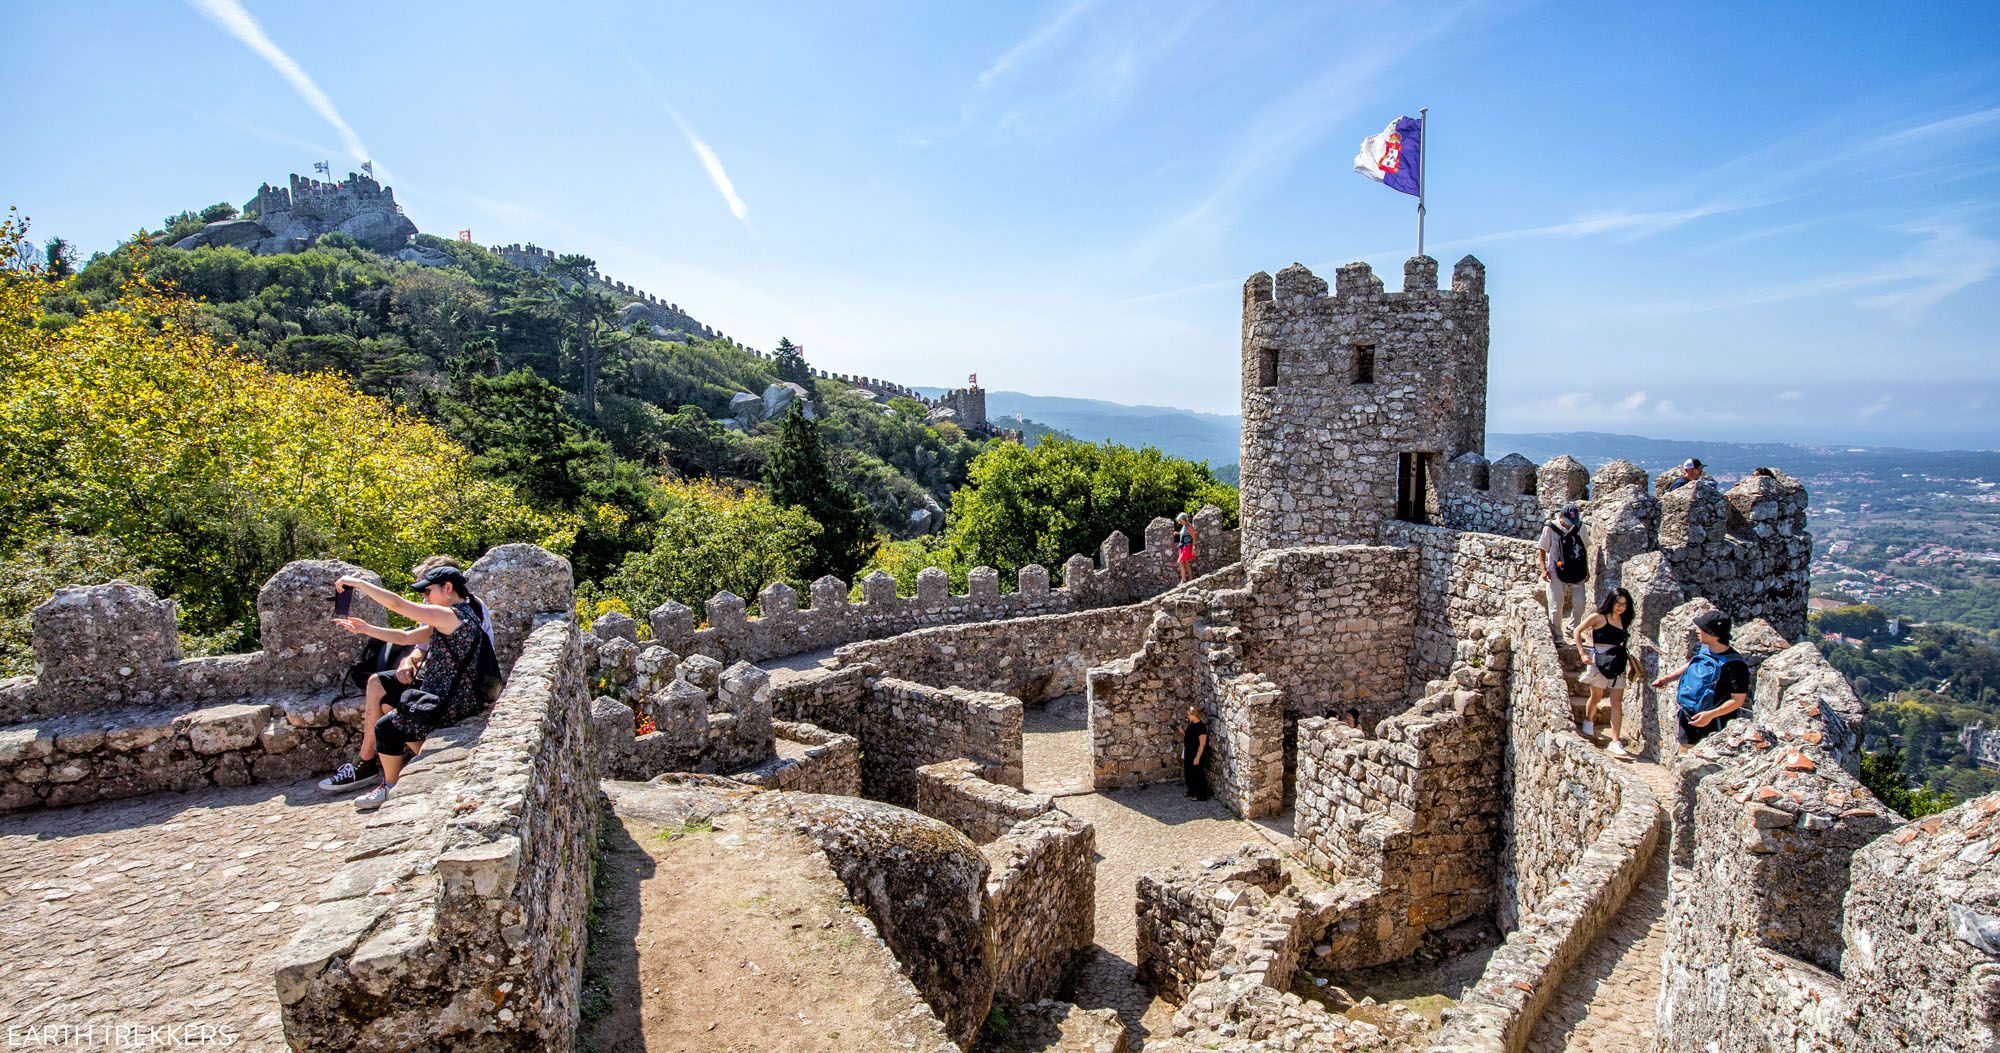 Featured image for “One Day in Sintra: 3 Sintra Day Trip Itineraries from Lisbon”